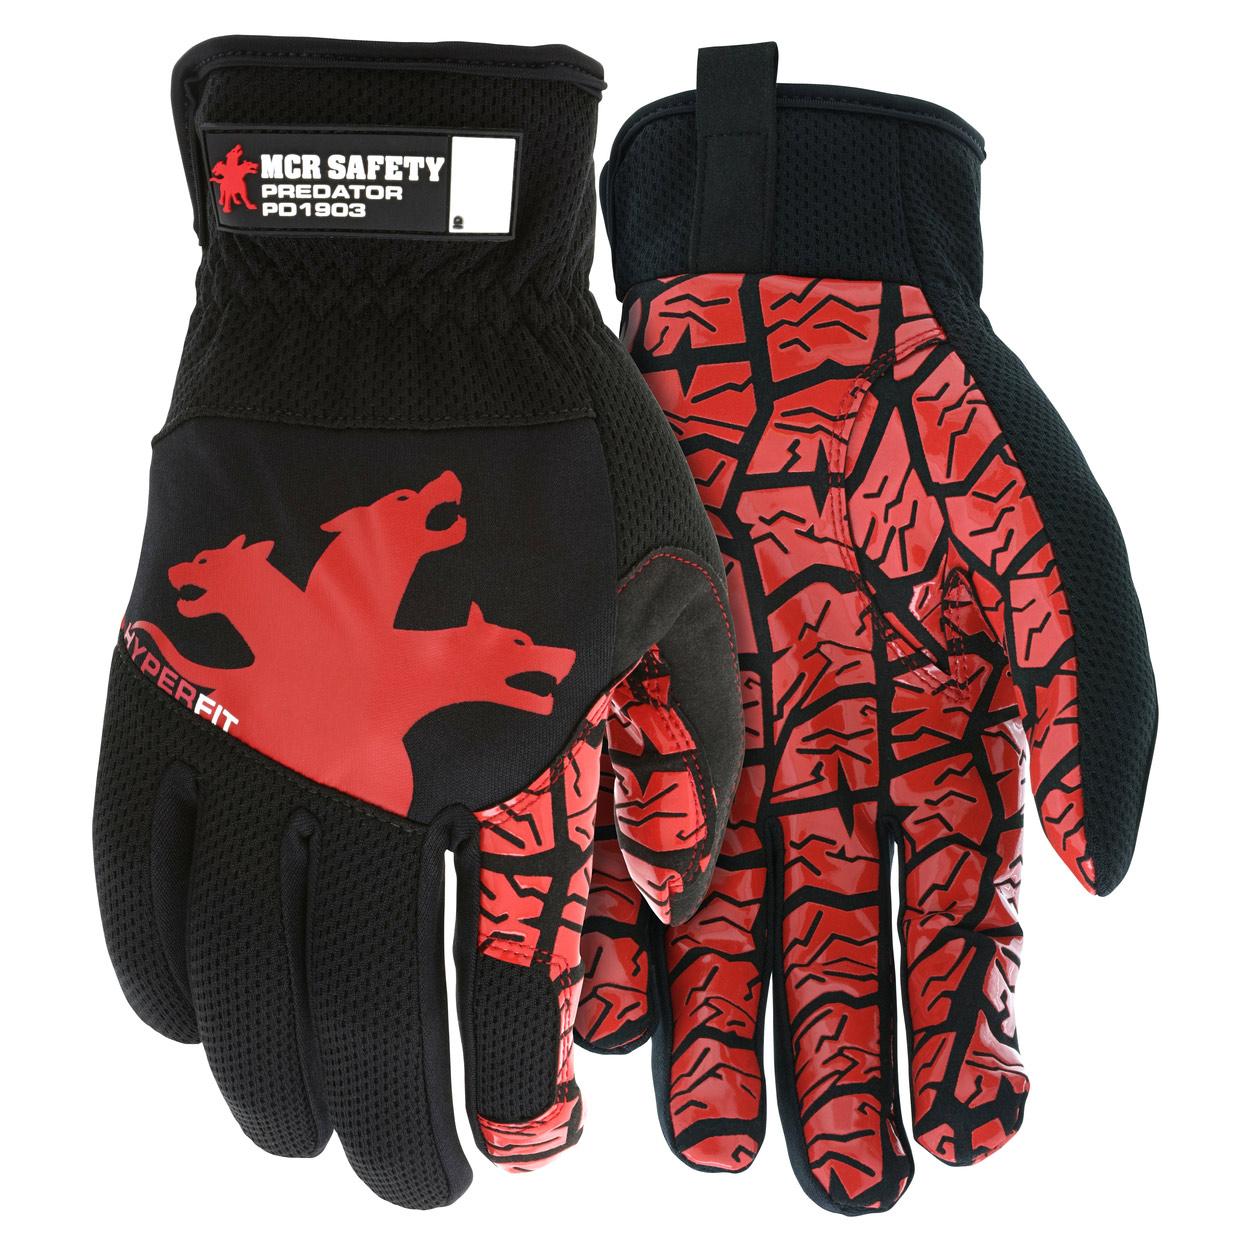 Black and red gloves front and back